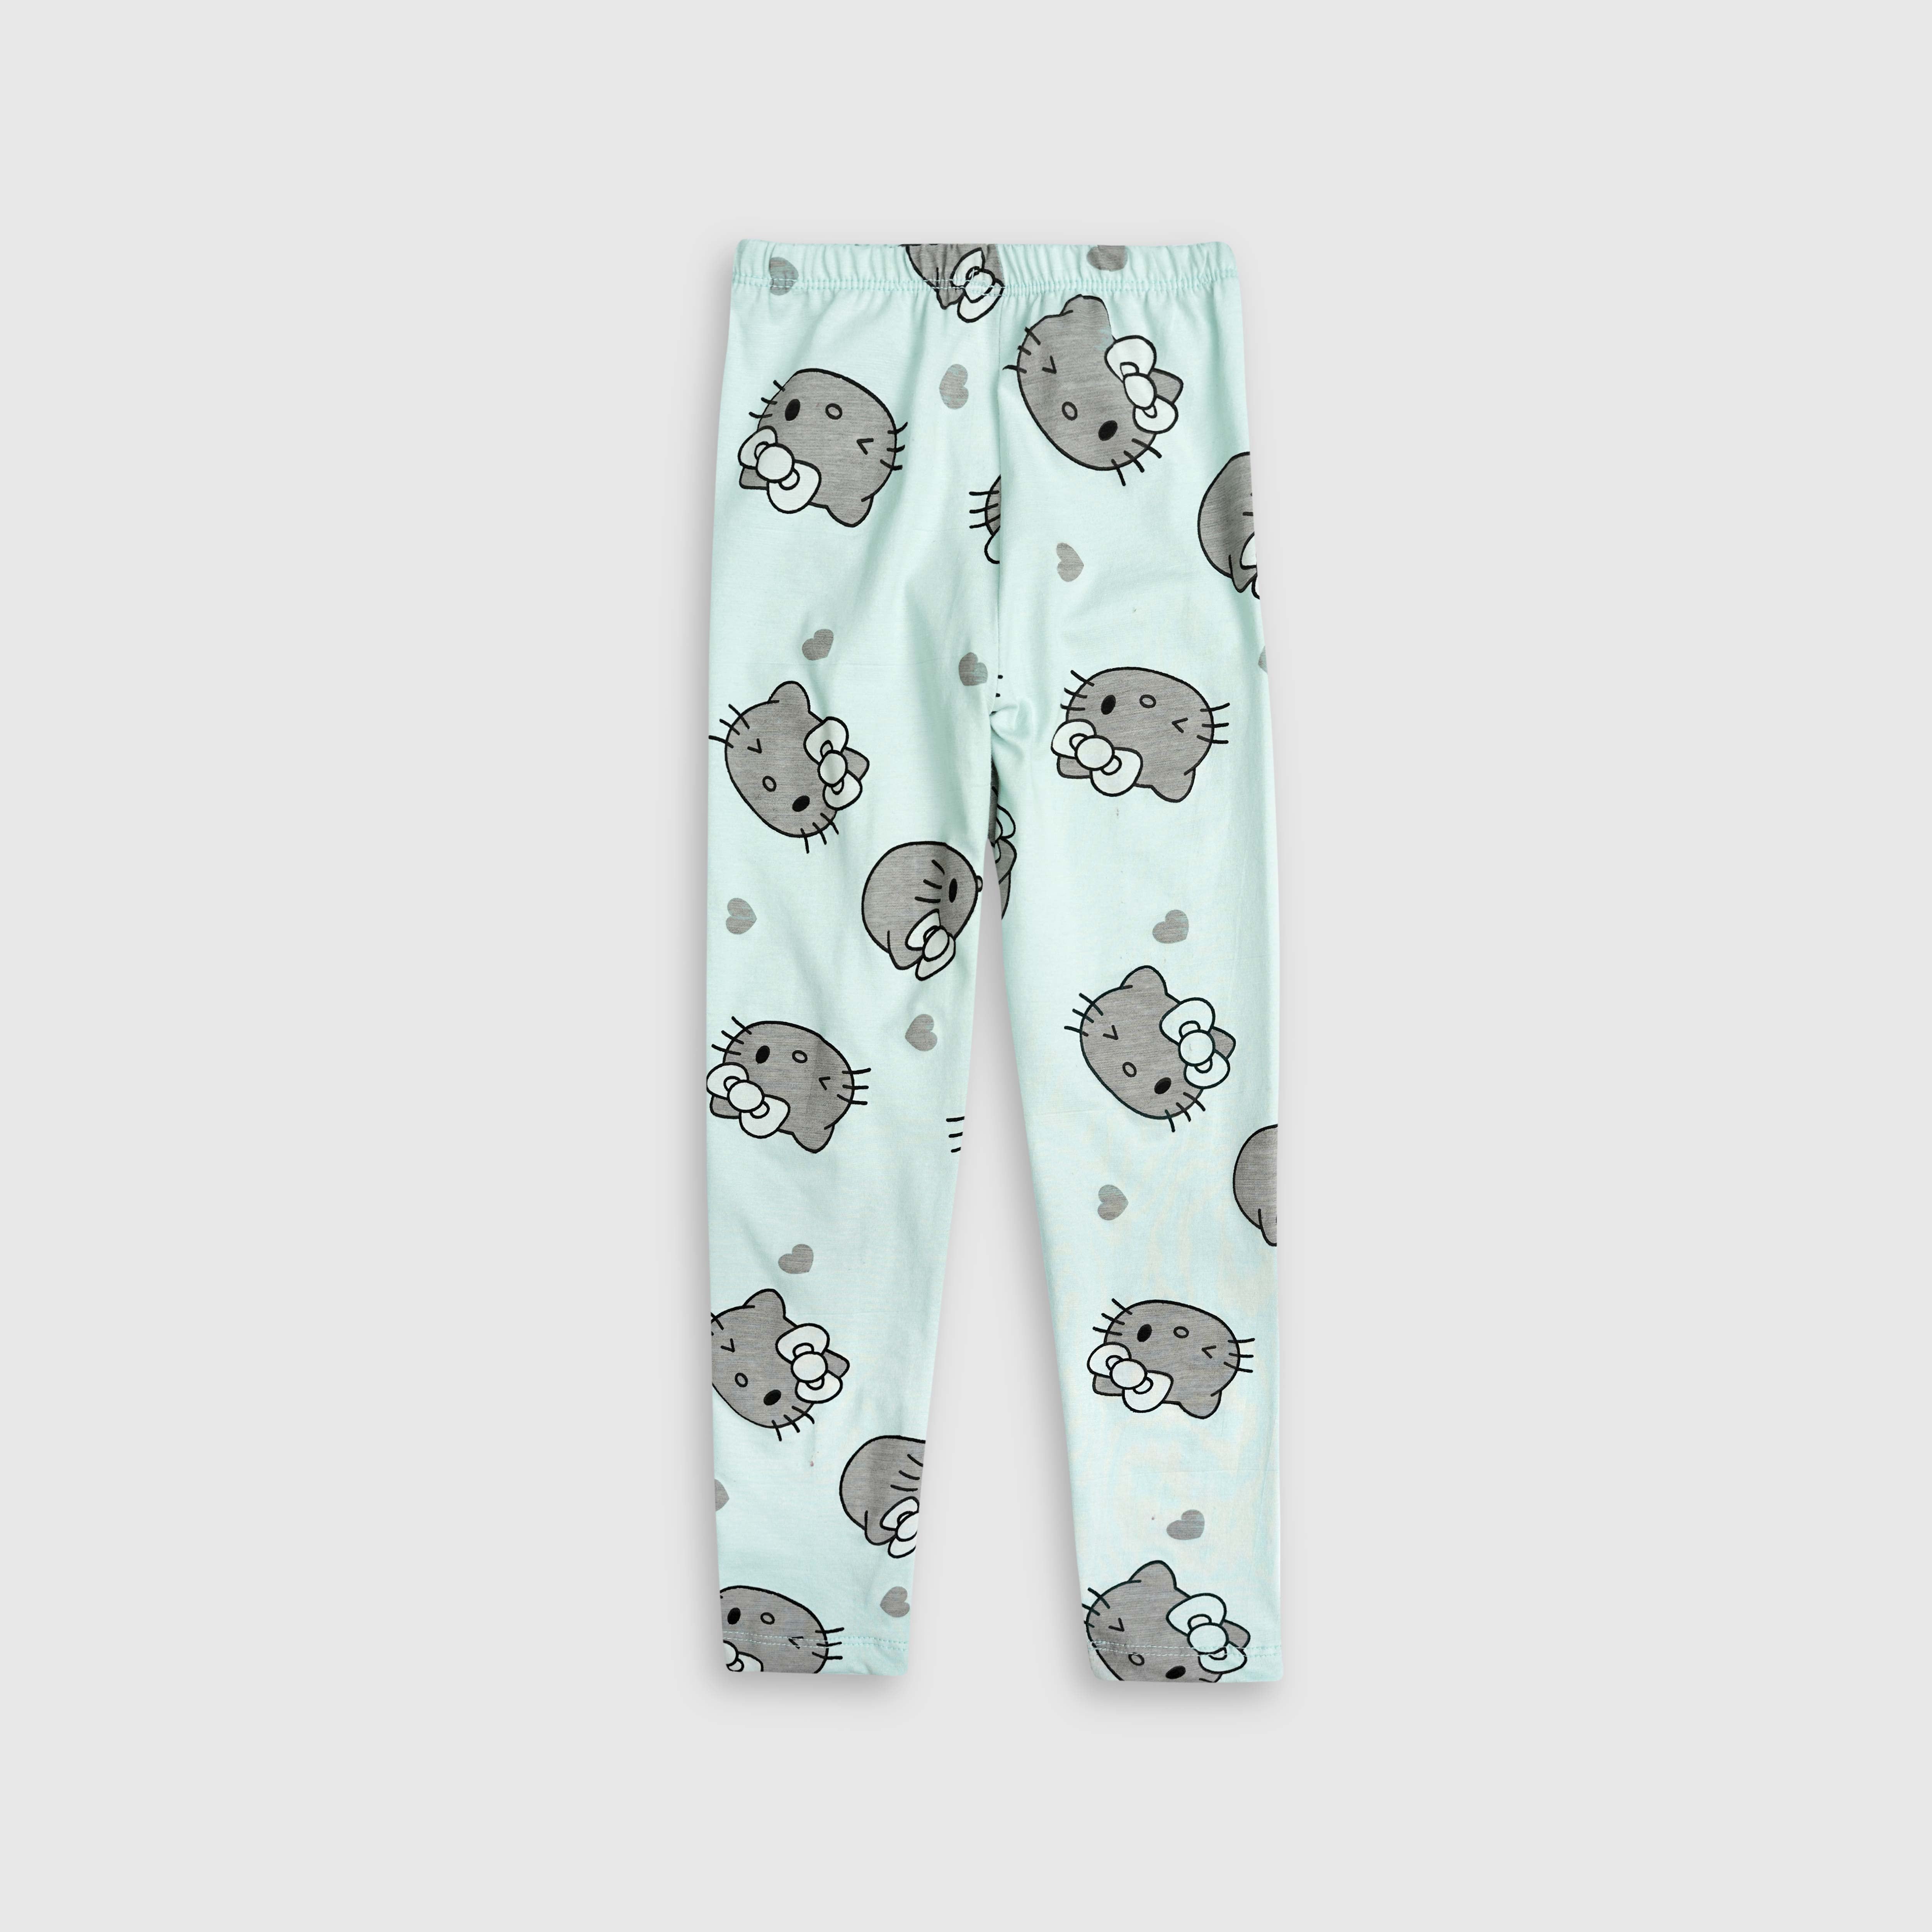 All-Over Kitty Printed Cotton Leggings